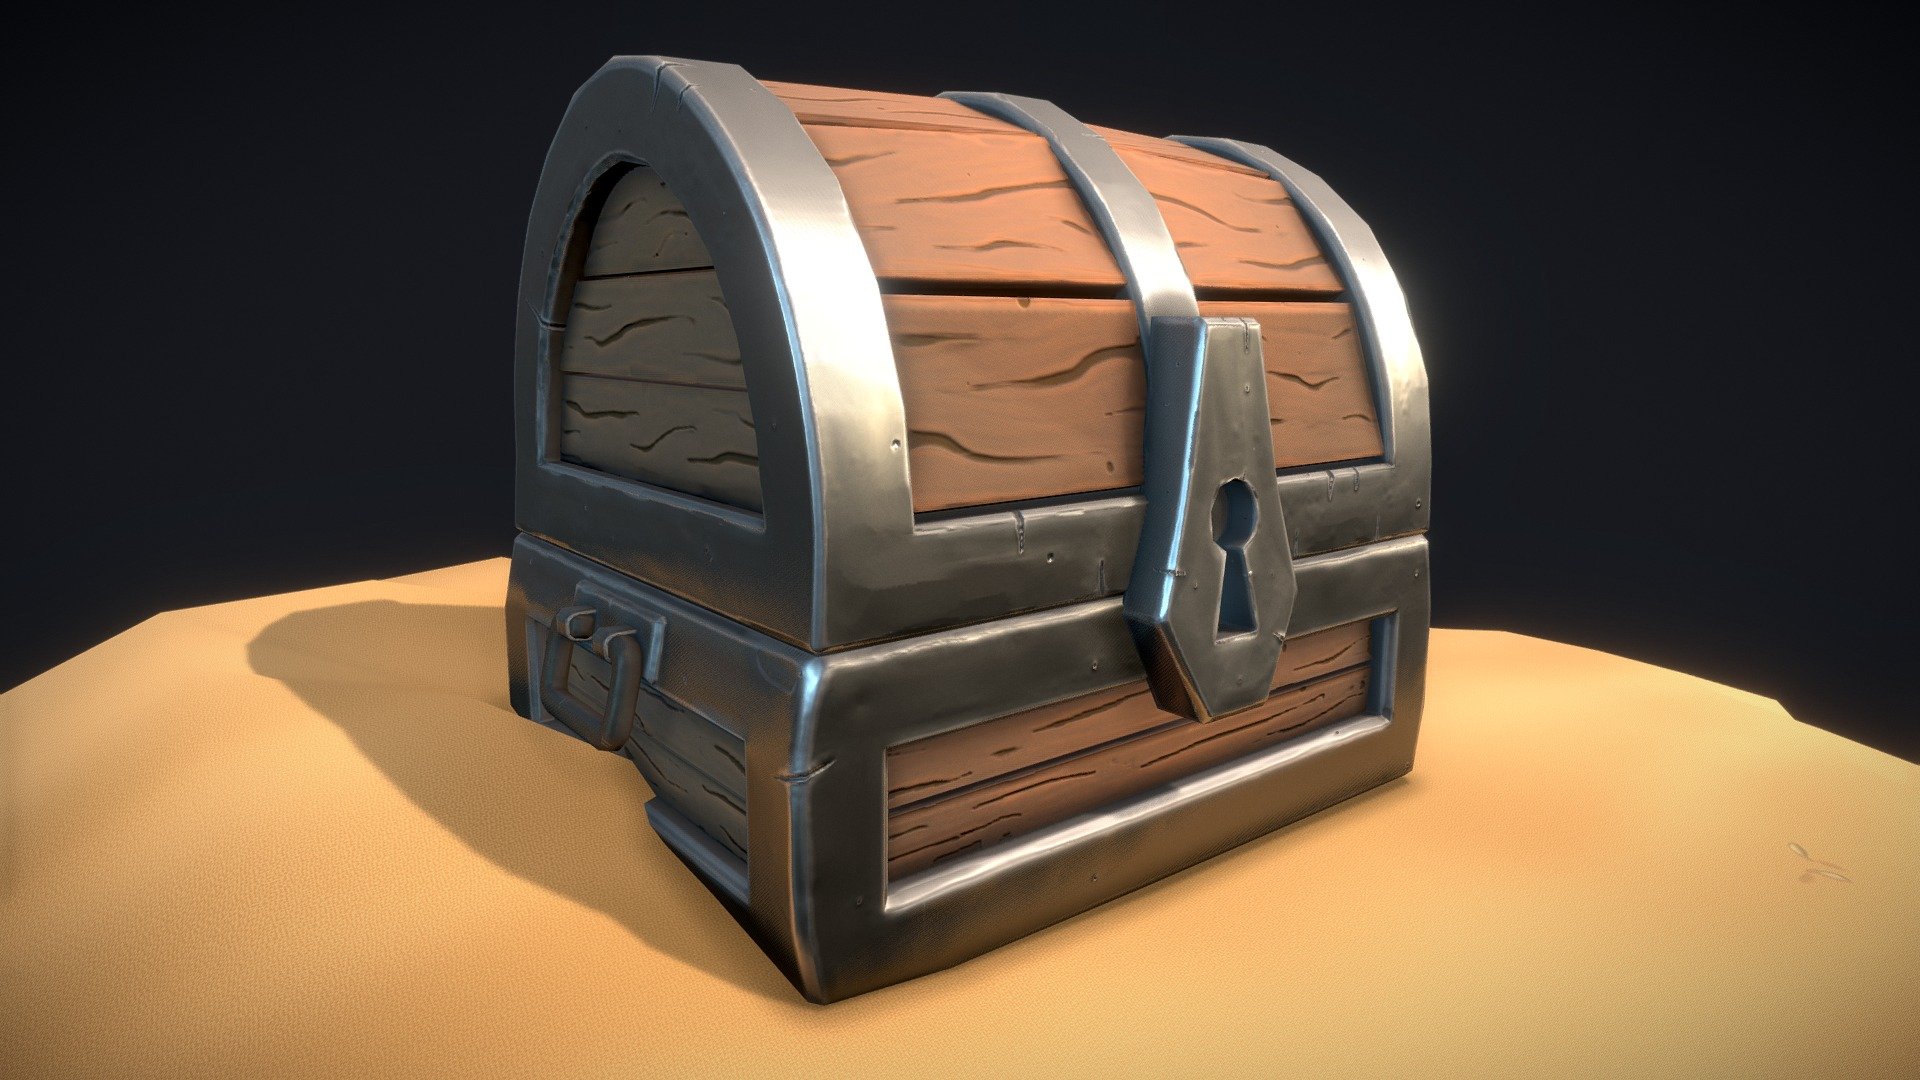 Finally, I made one of the most common props! The treasure chest, I choose cuz I wanted to test the sculpt mode in Blender to make a stylized metal and wood!
I hope you liked it!

For more models and files like this, don’t forget to follow! Any tips for me to apply to future models?
Just chest triangles: 2.300

You’ll get the following: 



Lowpoly file (.OBJ);



Highpoly file (.OBJ) - sculpt;



Color, Emissive, Metallic, Roughness, Ambient Occlusion, Normalmap Textures (.PNG) ;



Substance Painter file (.SPP);



Substance Designer file (.SBS);



.Blend file;


 - Stylized Treasure Chest - Lowpoly - Buy Royalty Free 3D model by EduardoIkeda 3d model